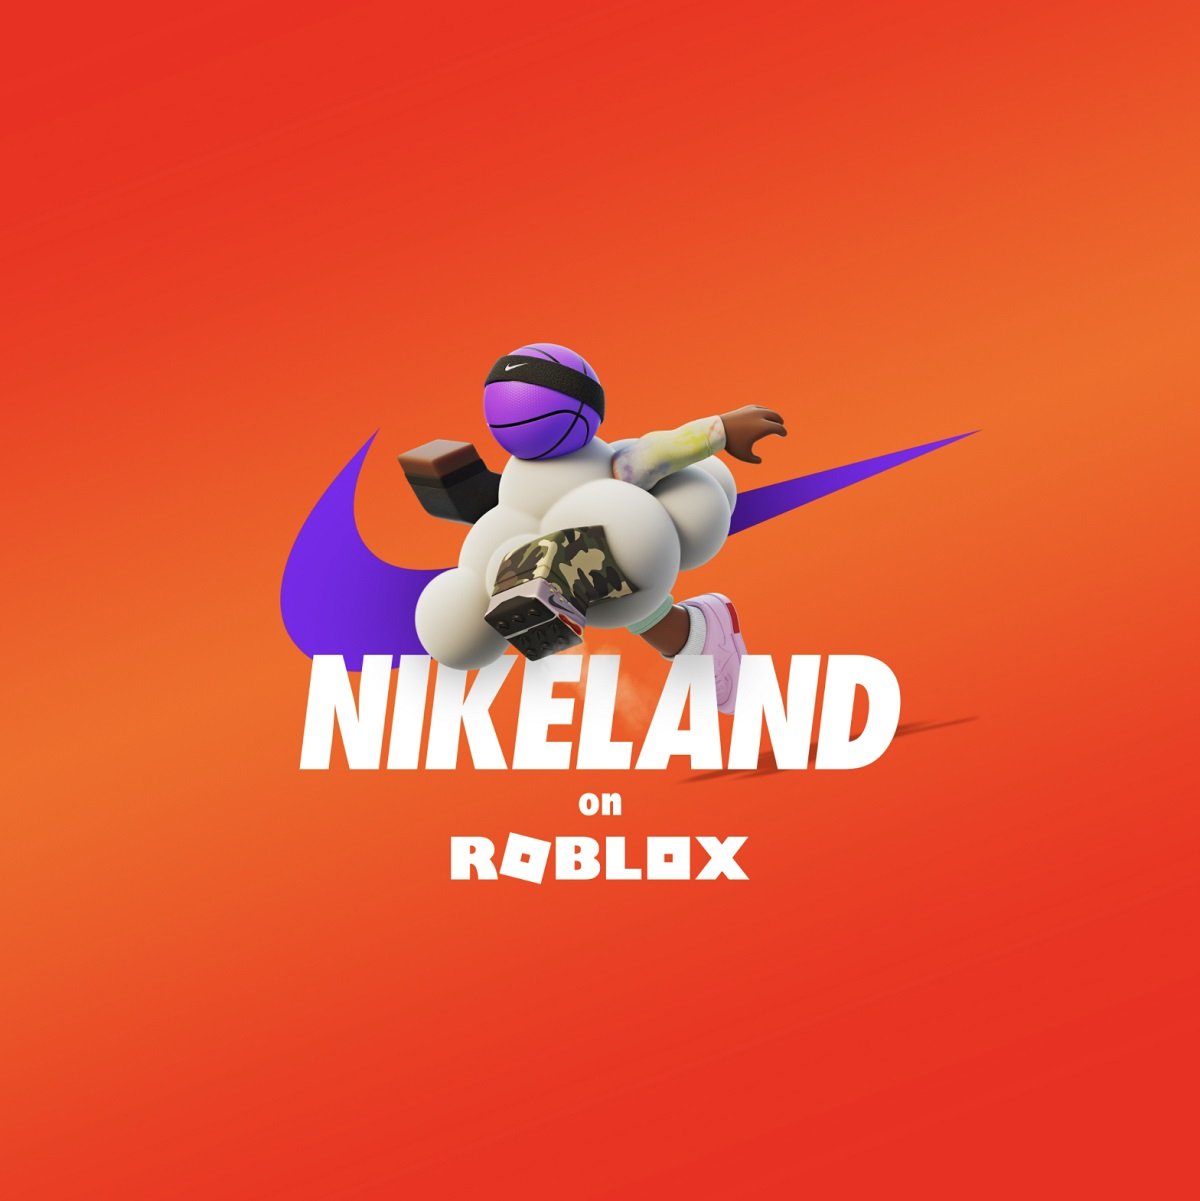 In Roblox, Nike debuts the 'Nikeland' experience.